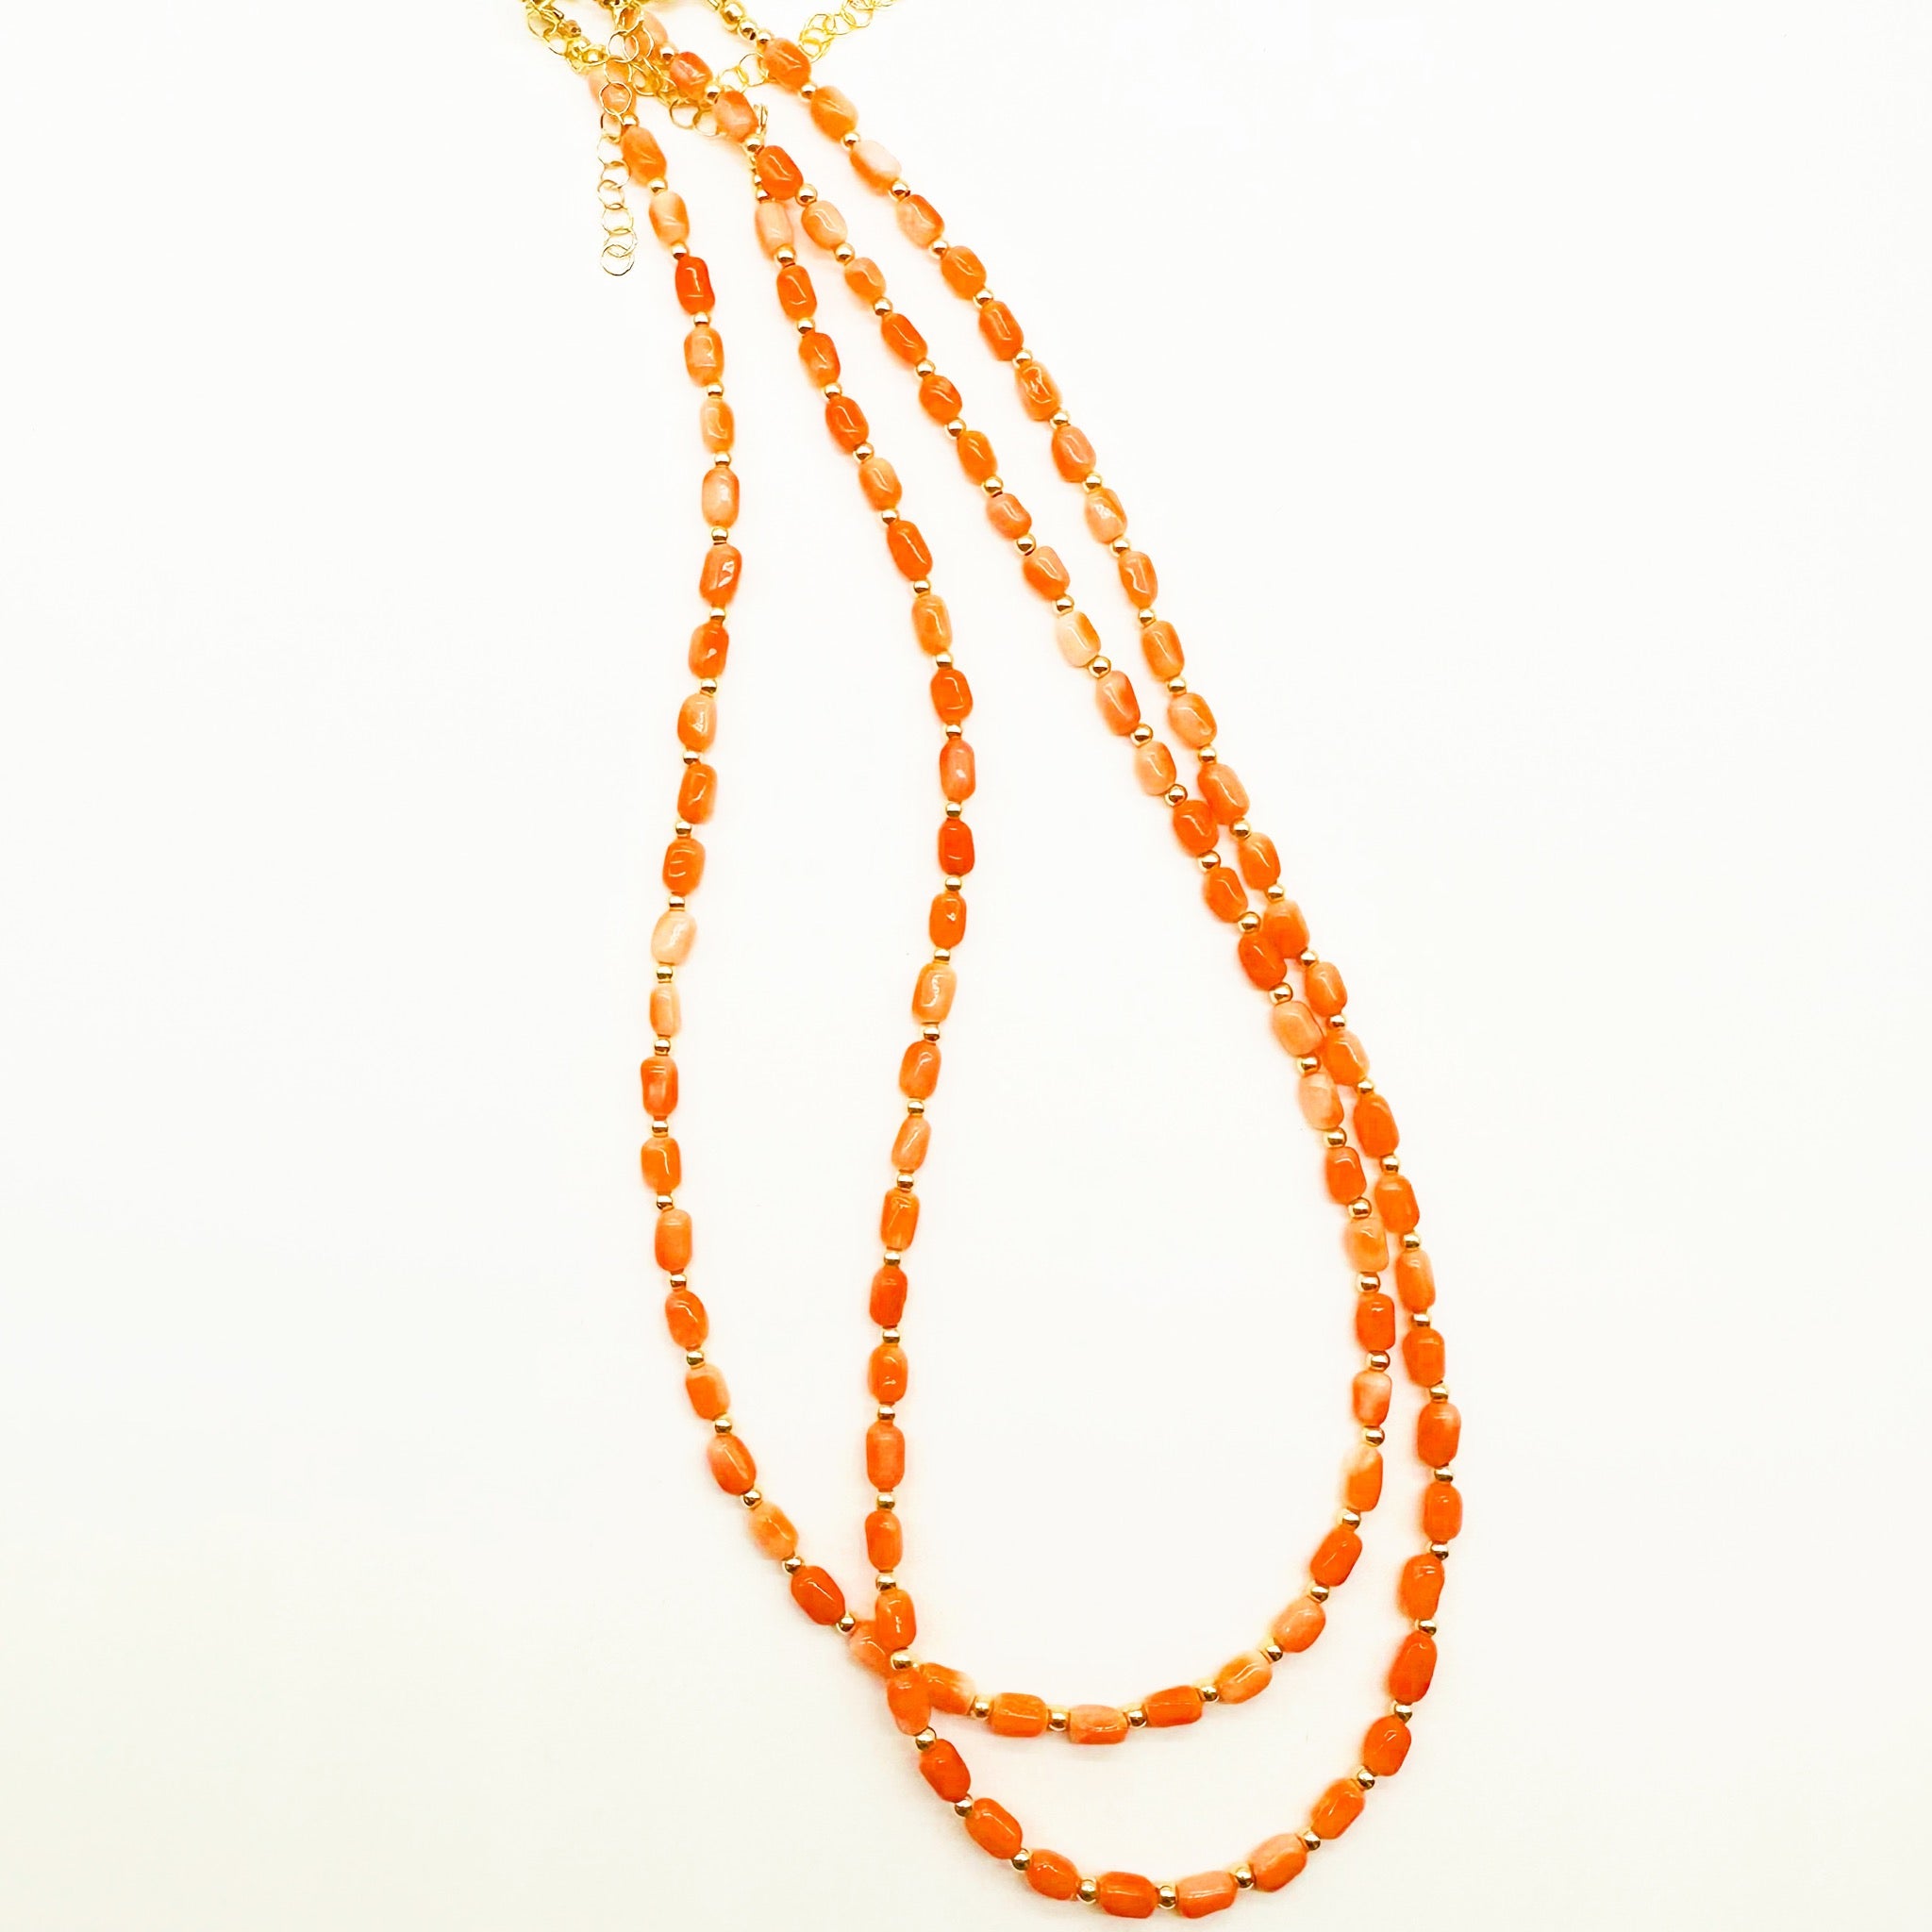 PINK CORAL BEADED NECKLACE